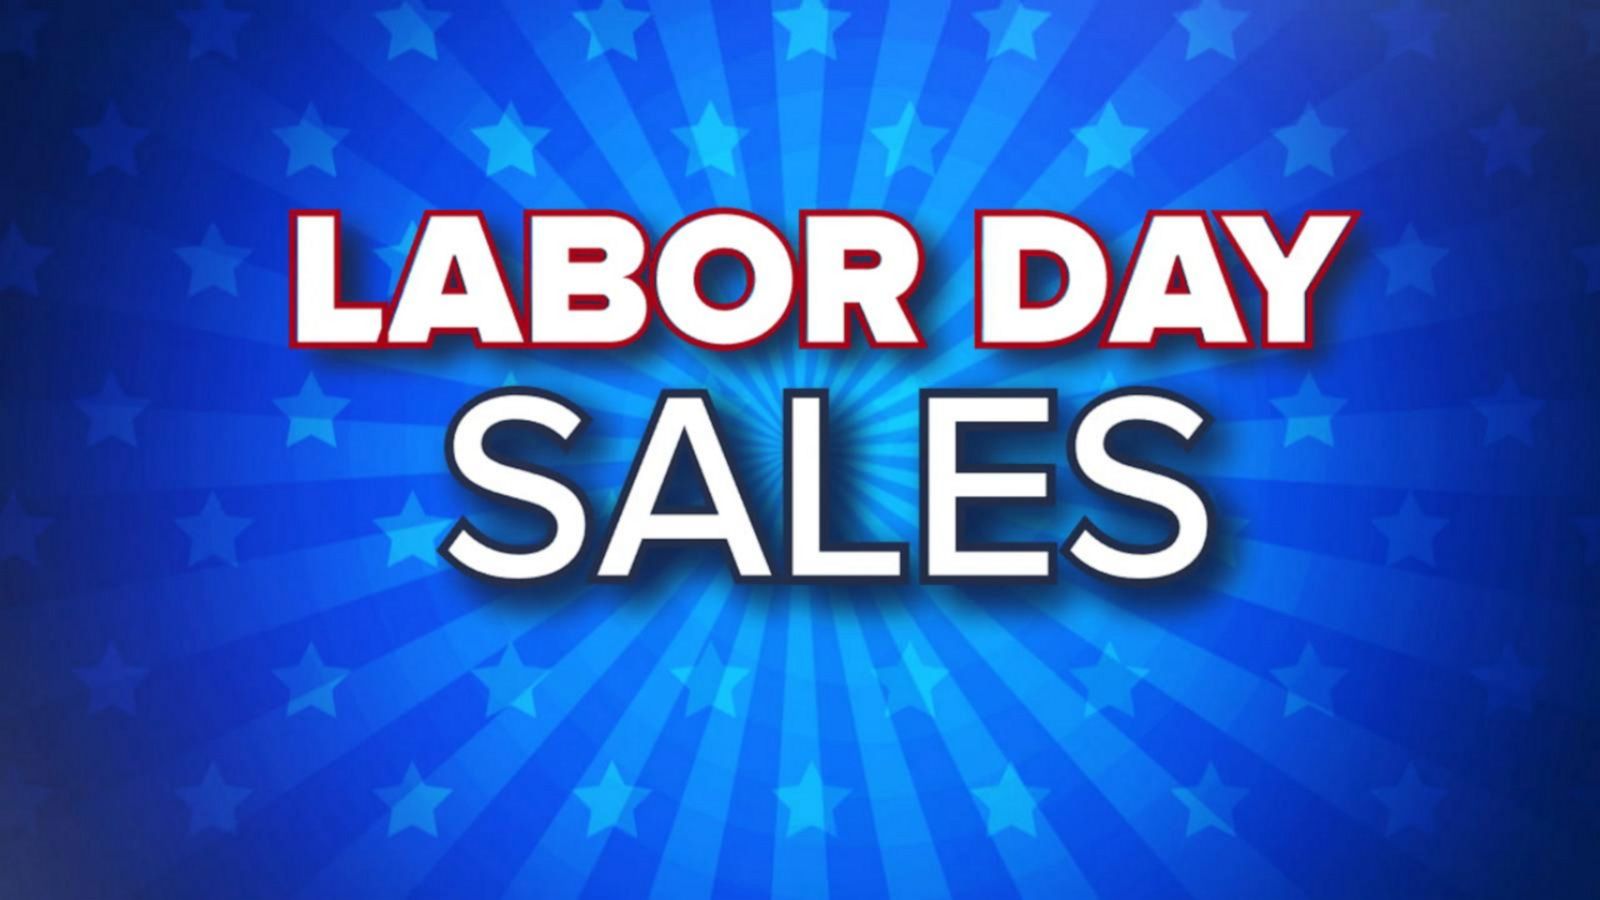 Labor Day sales offer relief from skyhigh inflation prices Good